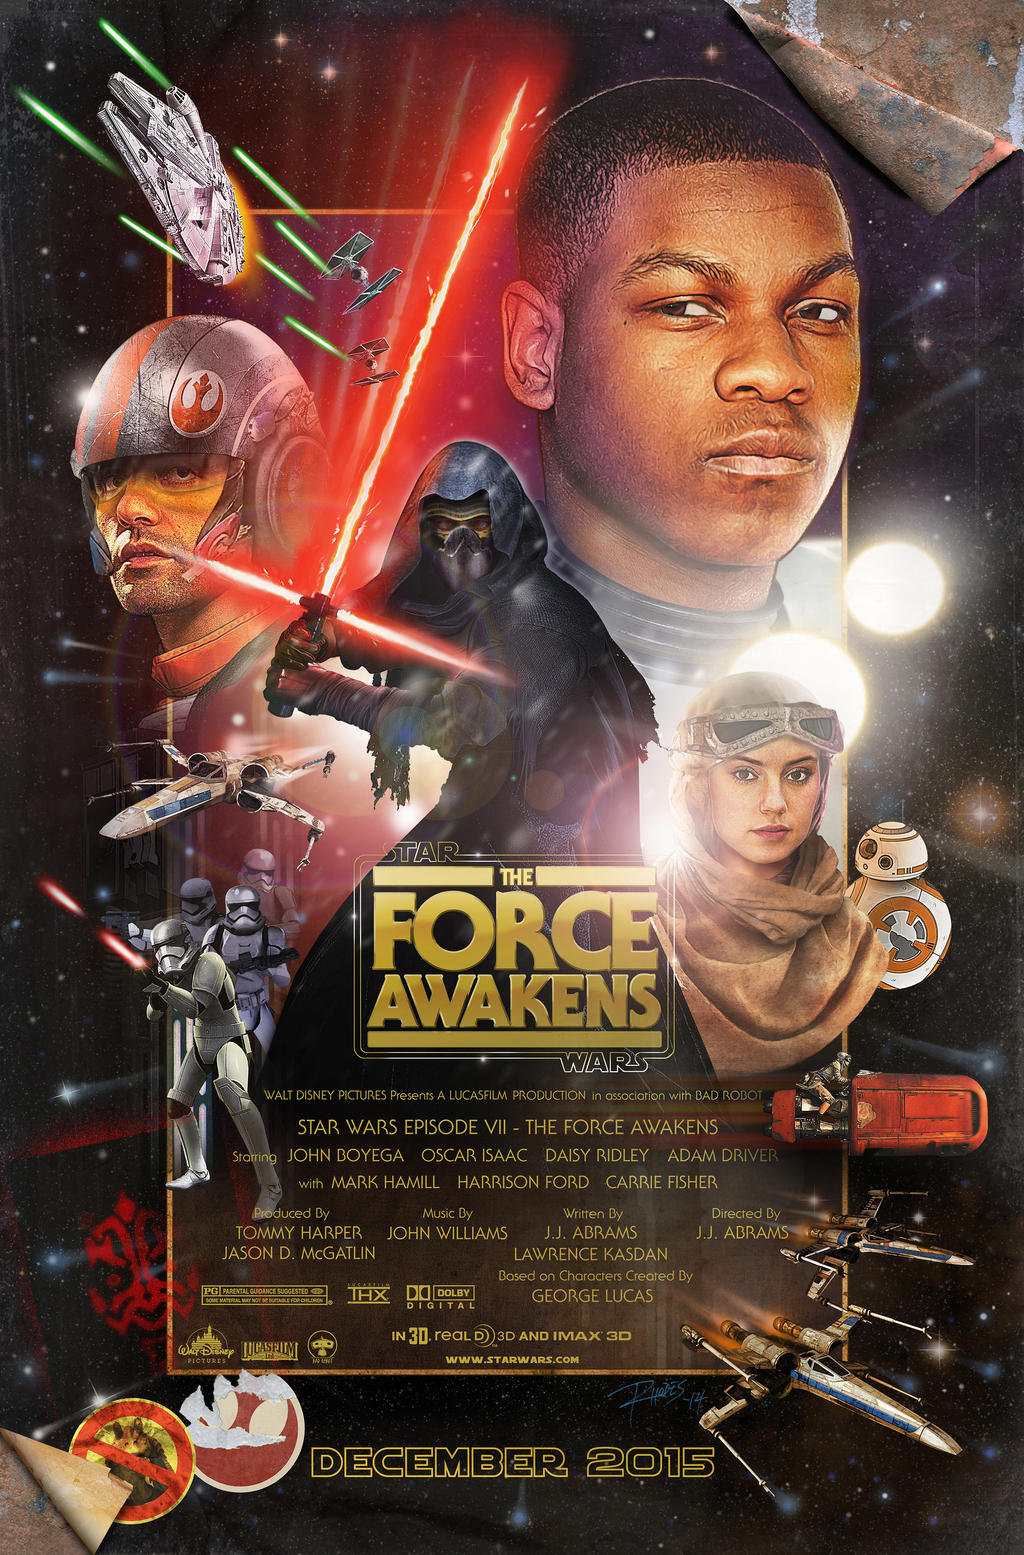 The Force Awakens Poster (Version A) Small by Love-Carmichael